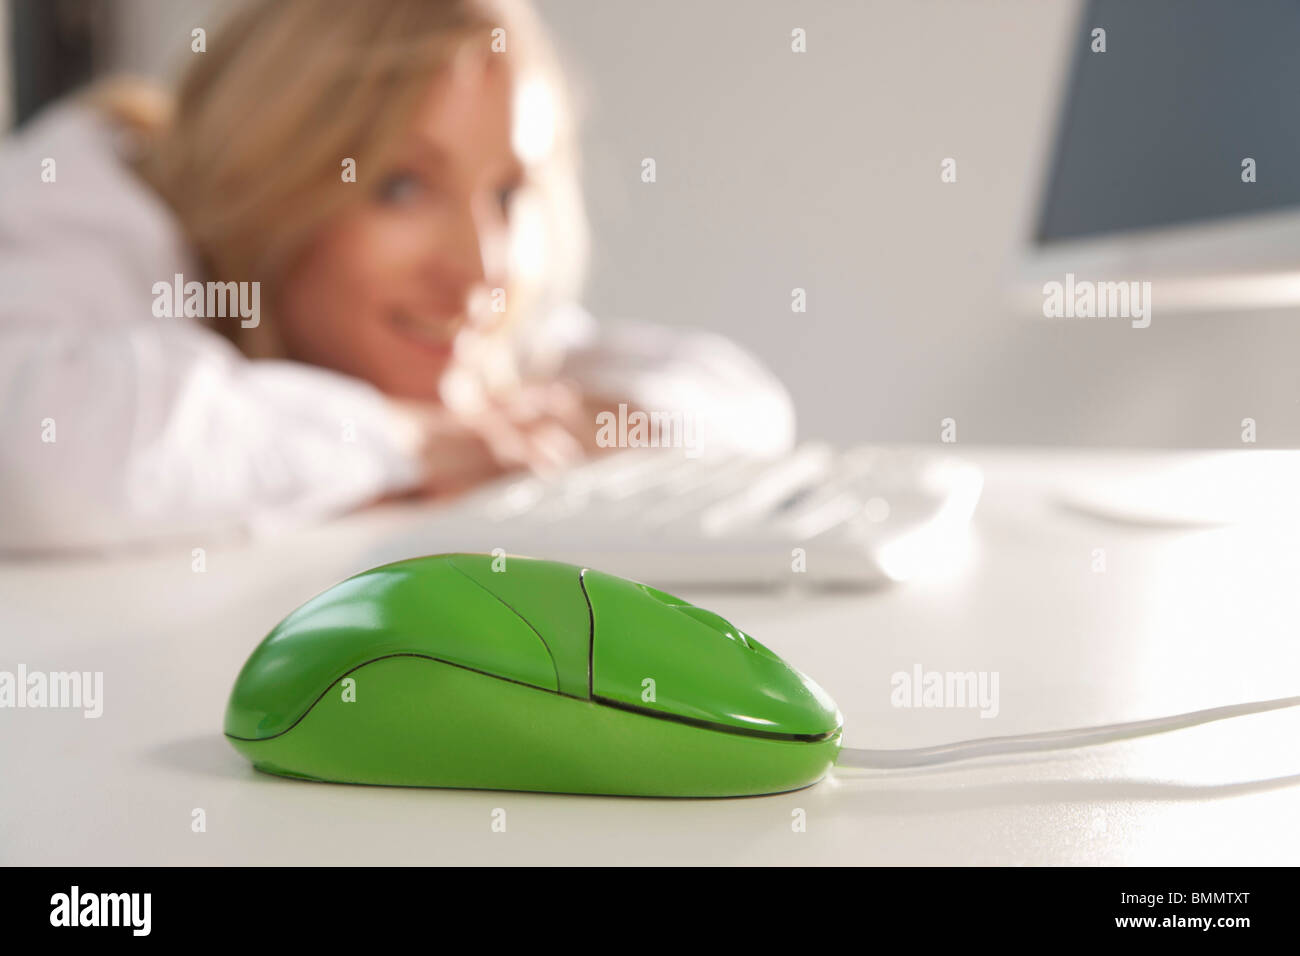 Green mouse on office desktop with woman Stock Photo